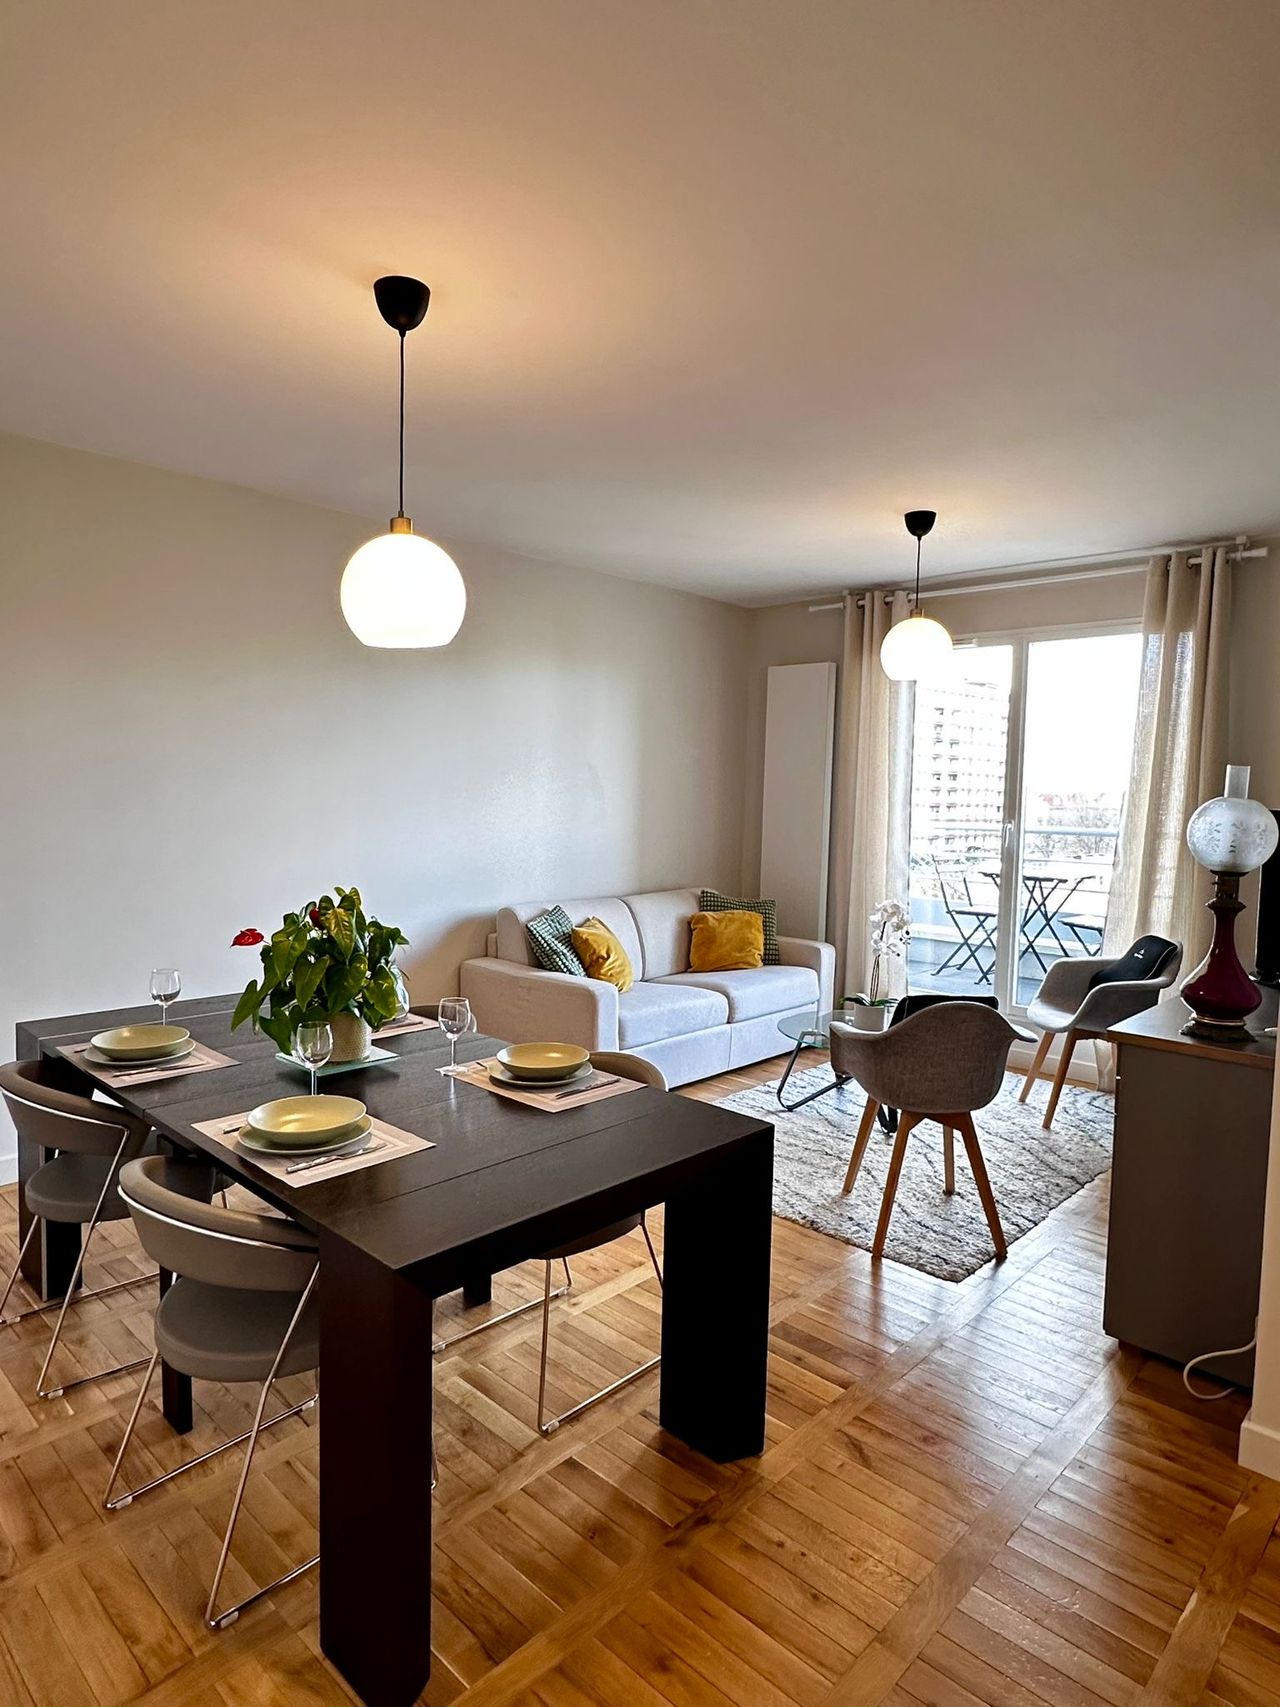 New and carefully furnished three-room apartment with a wonderful view of Paris